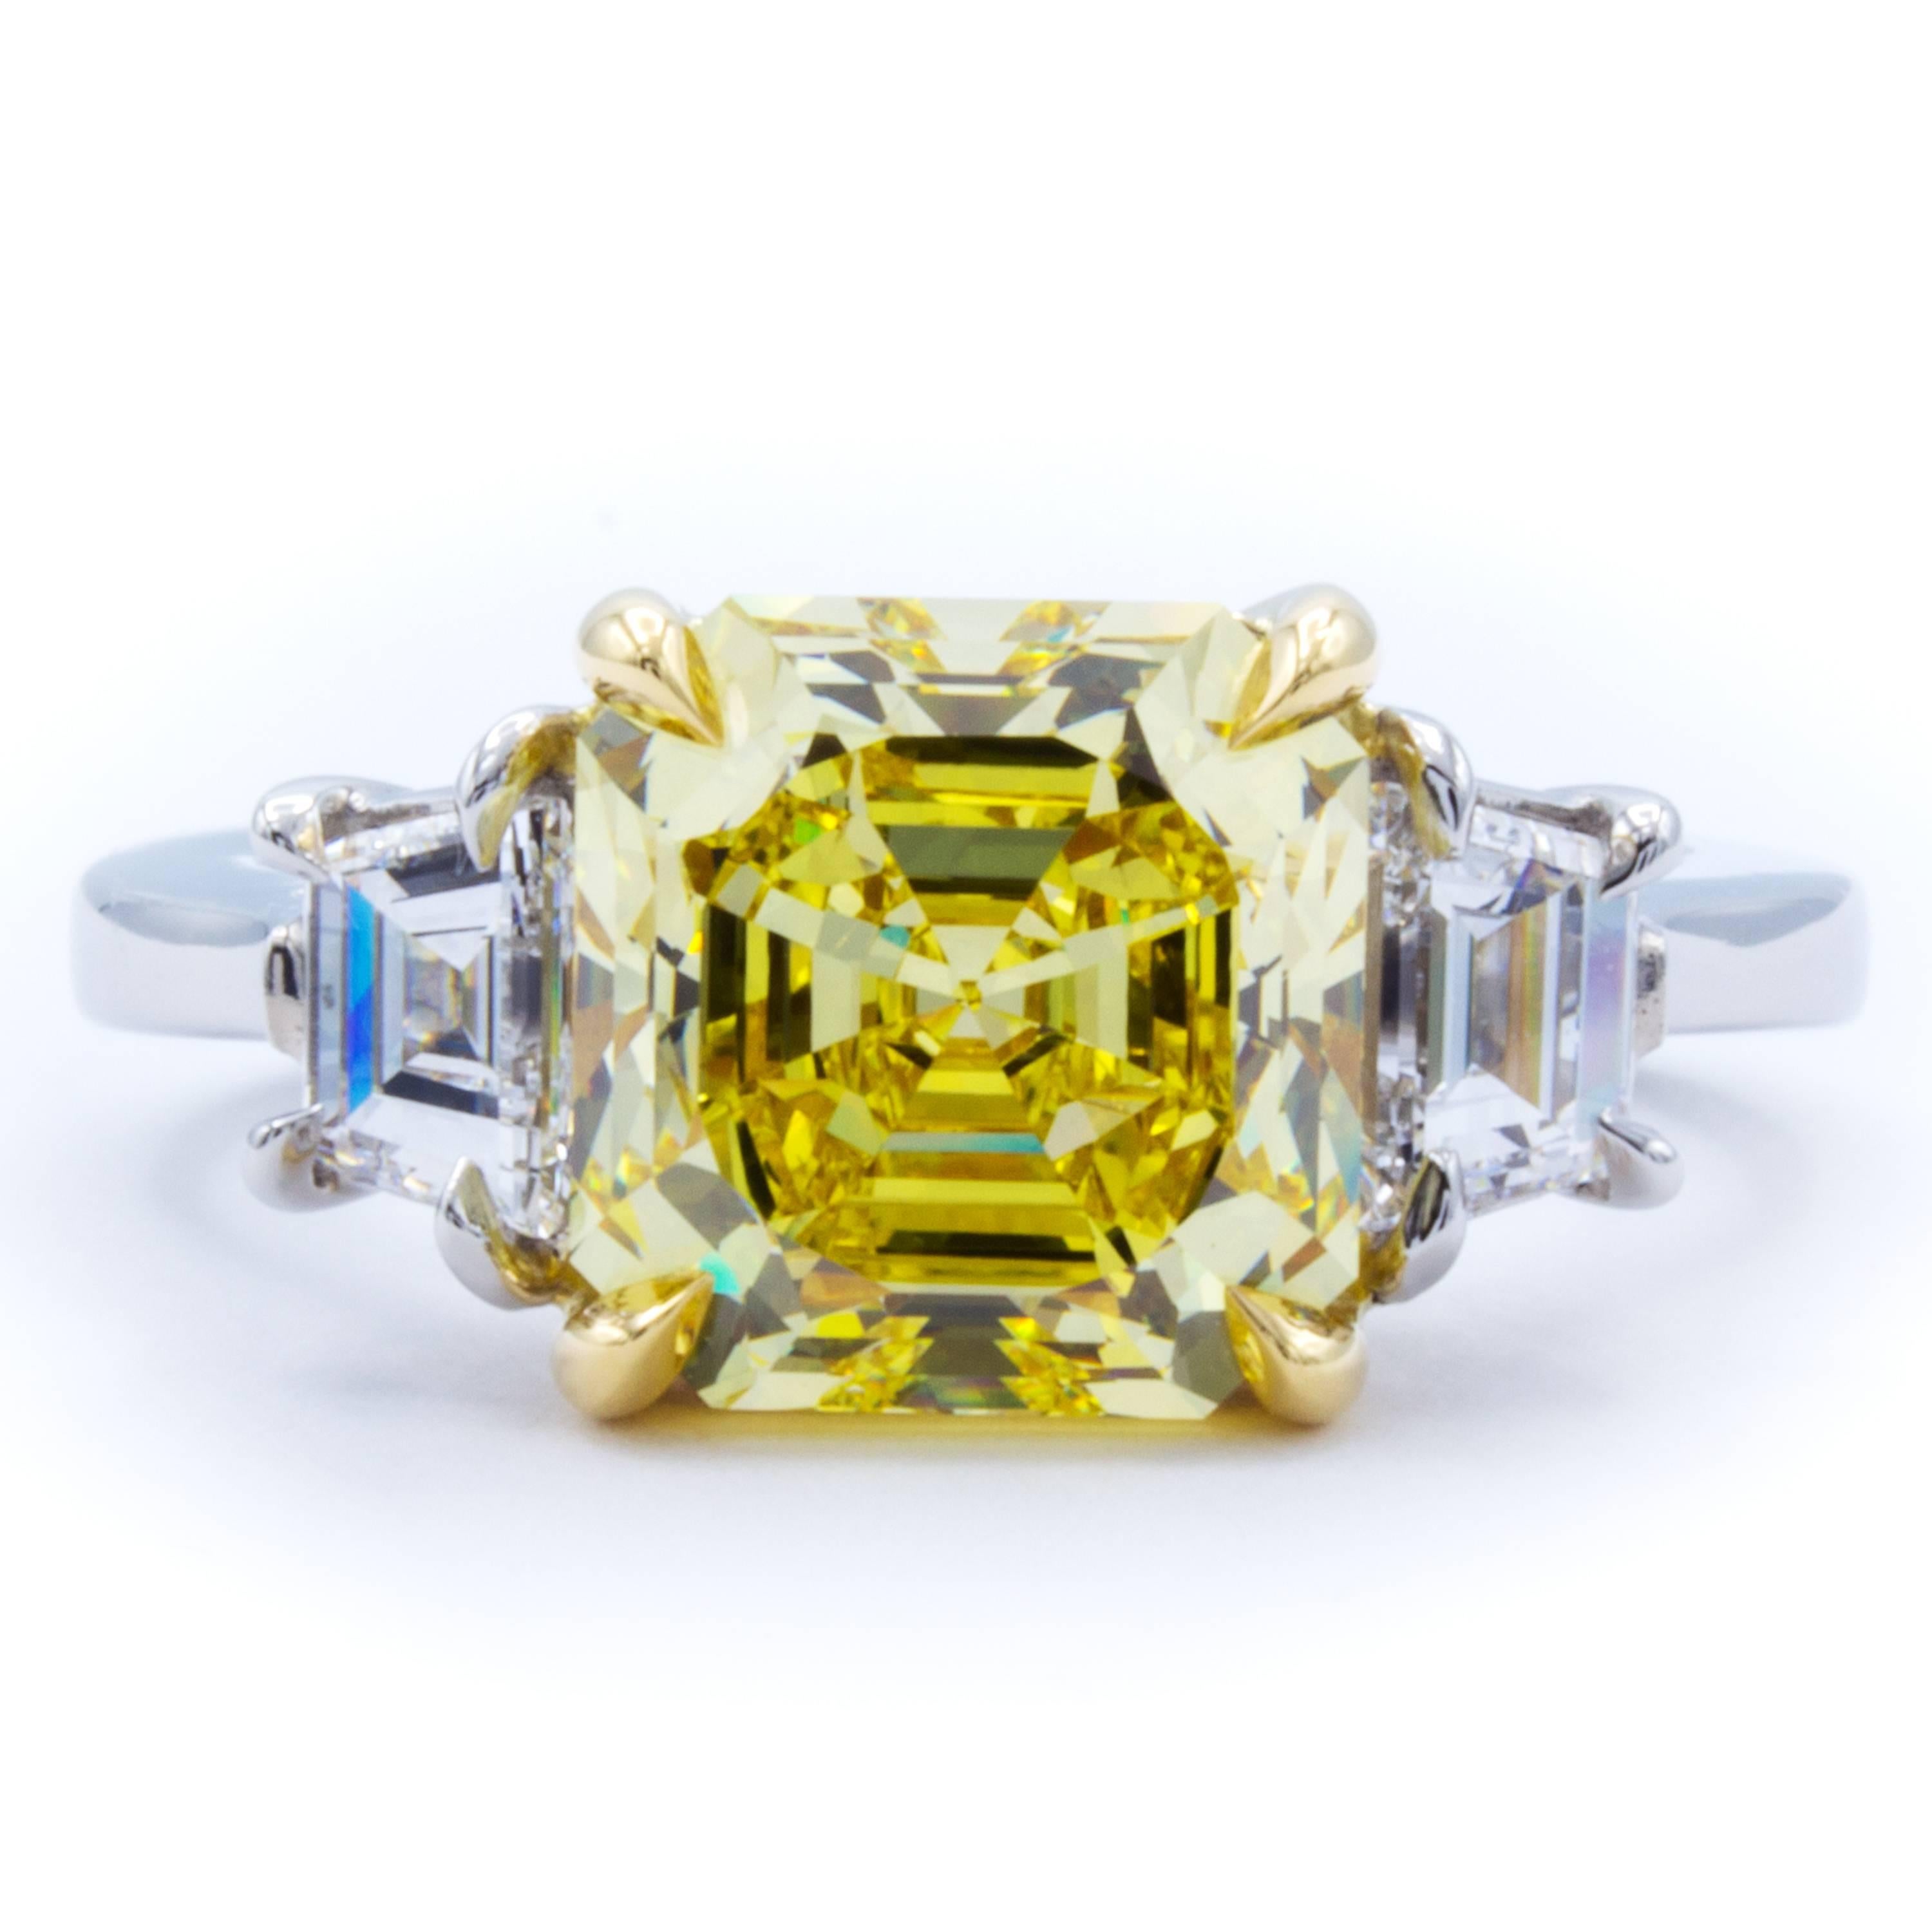 This Rosenberg Diamonds & Co. engagement ring reaches toward the heart with an incredibly rich natural fancy vivid yellow GIA certified 3.39 carat asscher cut diamond. As natural fancy vivid is the best grading GIA attributes to color diamonds this